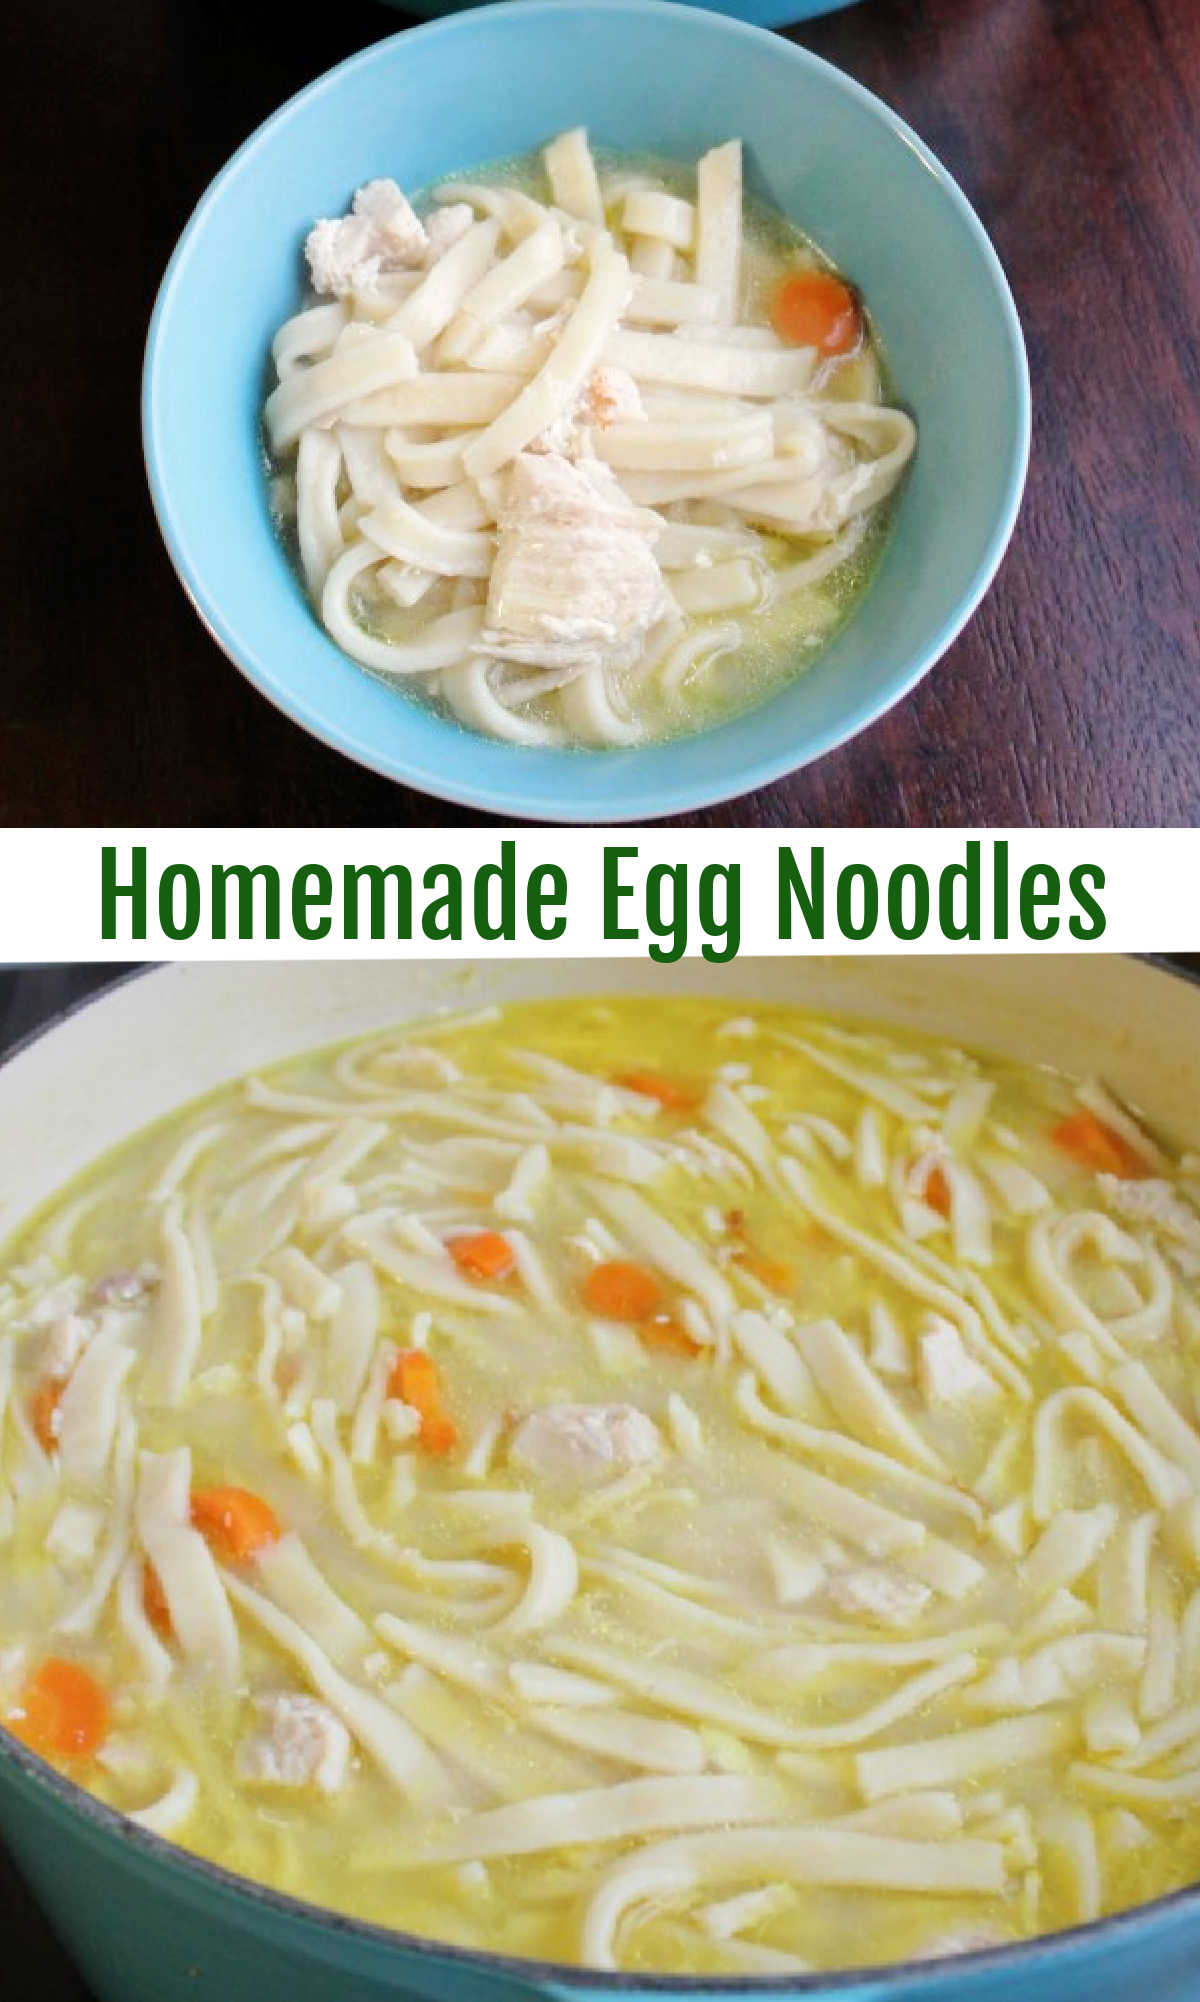 These homemade egg noodles are perfect for making chicken noodle soup. They are also great for beef and noodles or any variety of comfort foods.  But they are perhaps most famous for showing up as a side dish on our Thanksgiving plates.  No matter how you serve them, they are fun to make and a great project for the family. Nothing tastes as good as homemade!